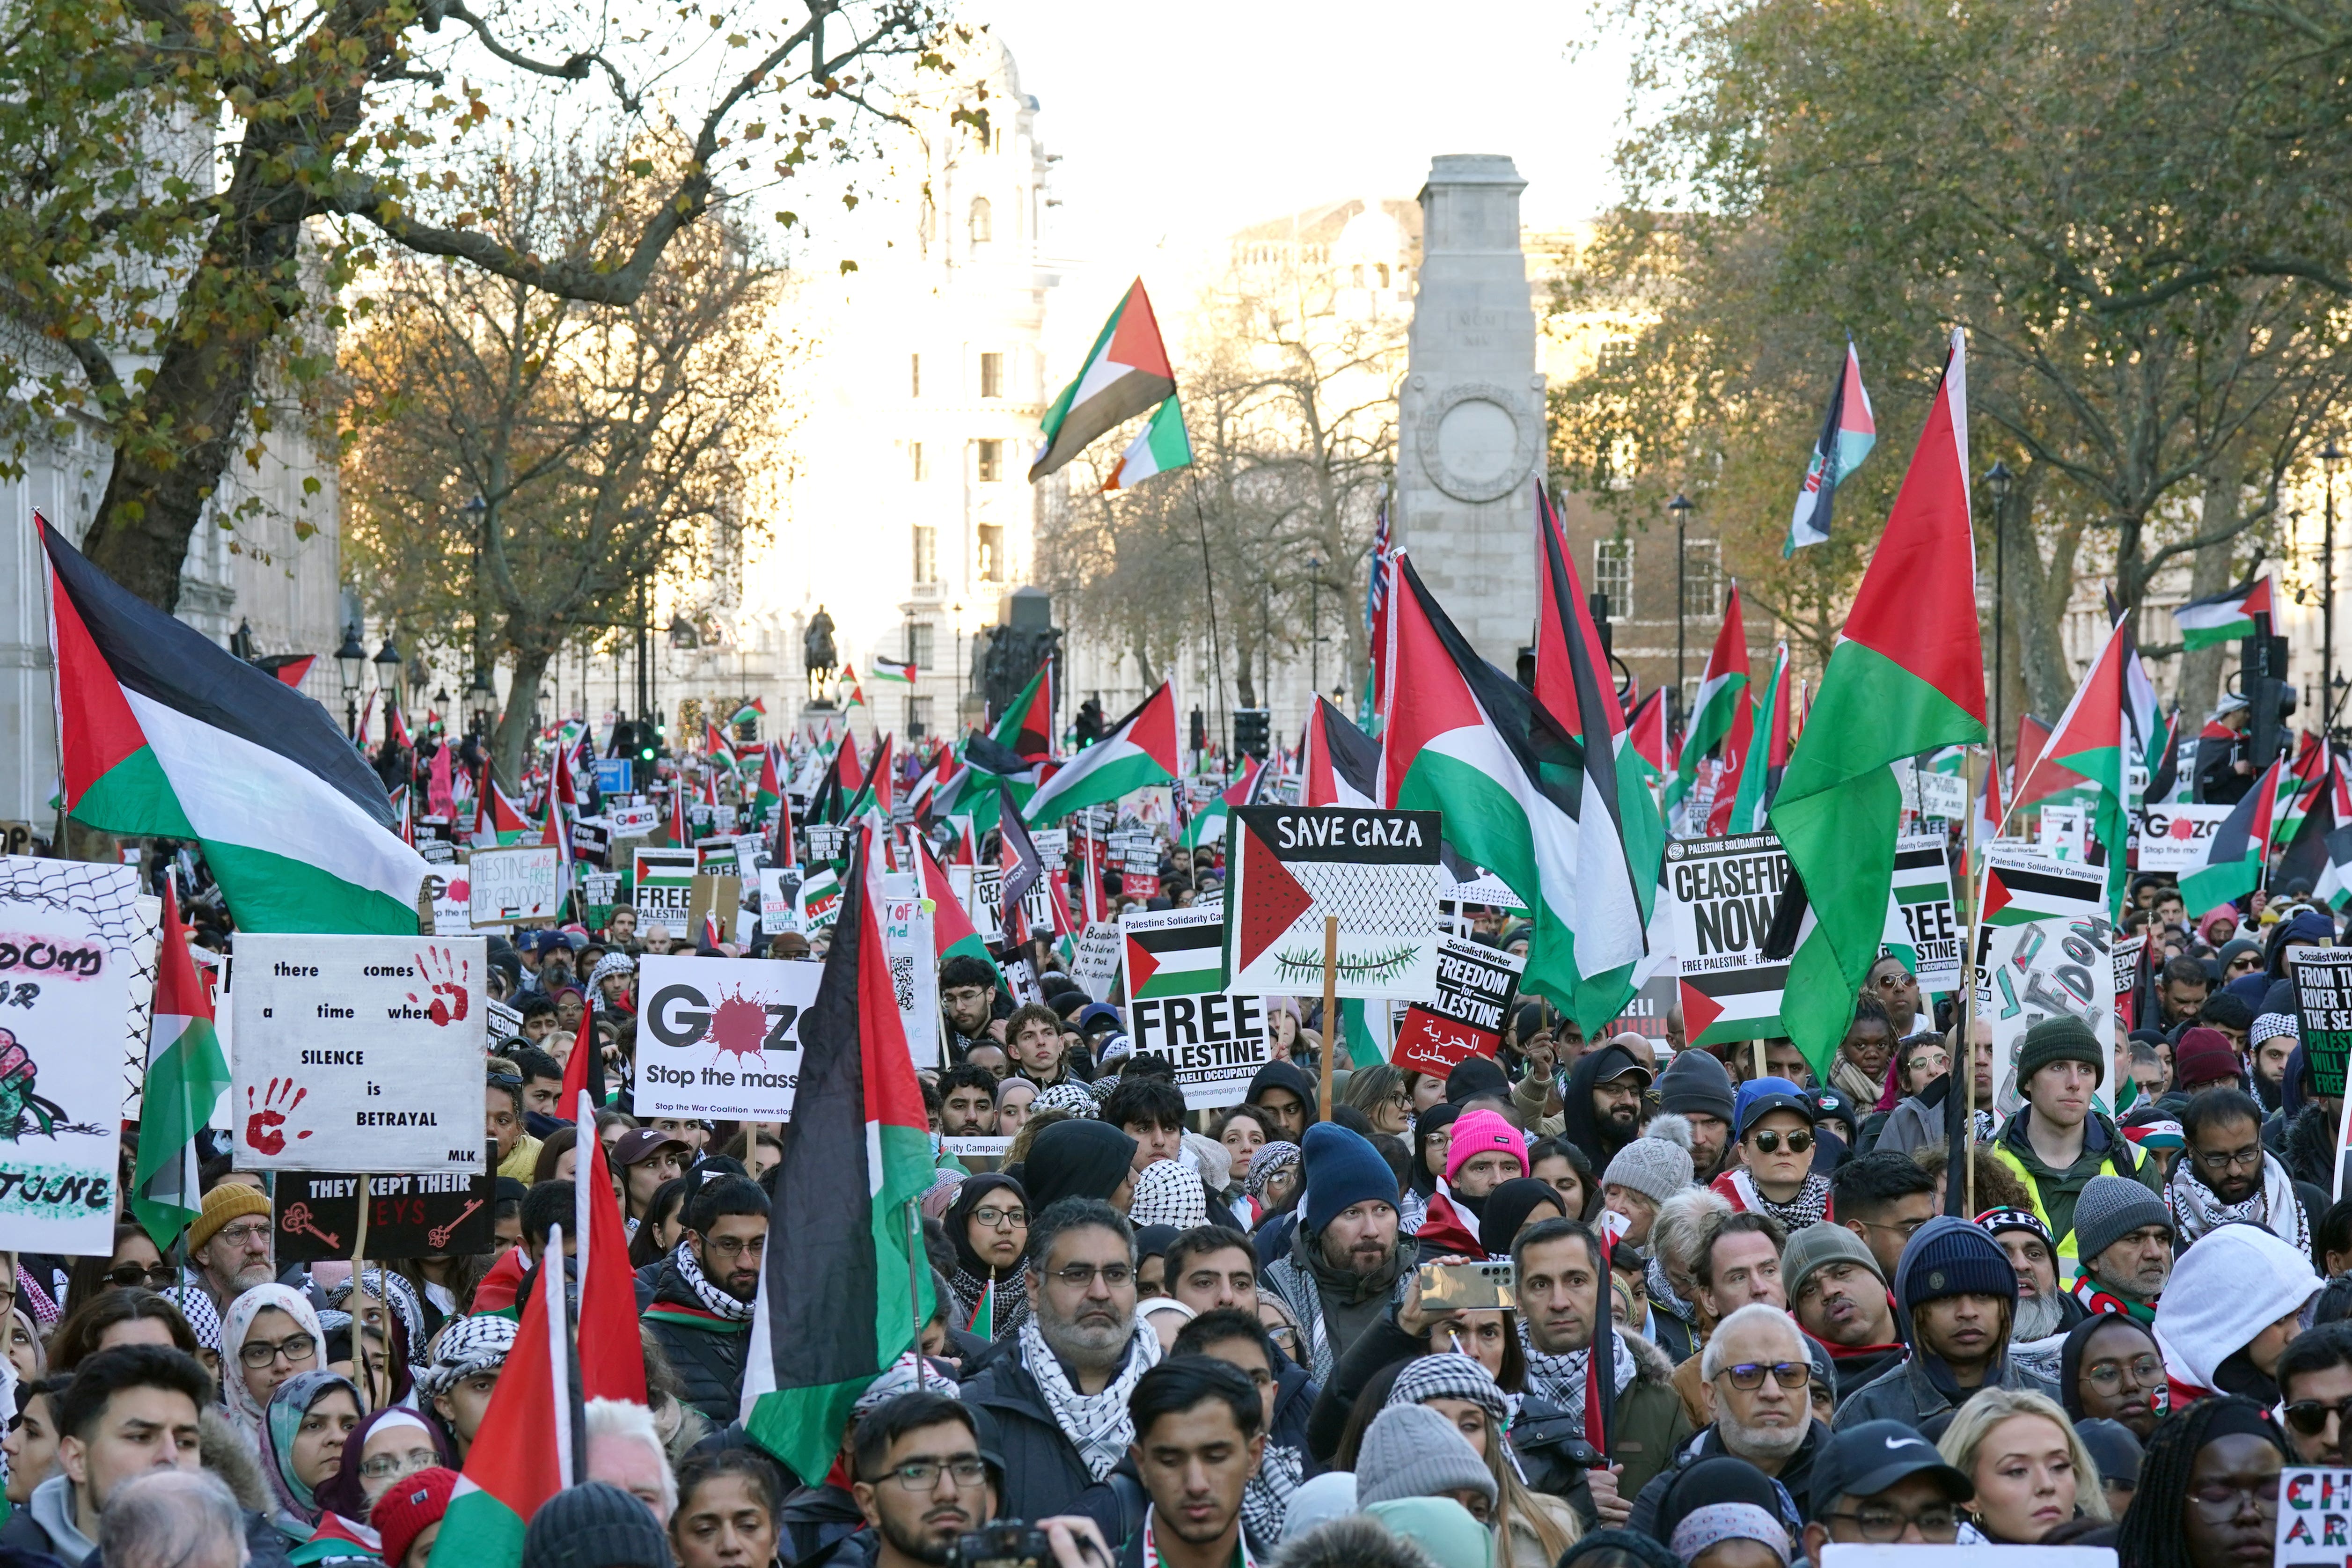 Protestors calling for a ceasefire in Gaza in a march organised by the Palestine Solidarity Campaign and other groups (Lucy North/PA)